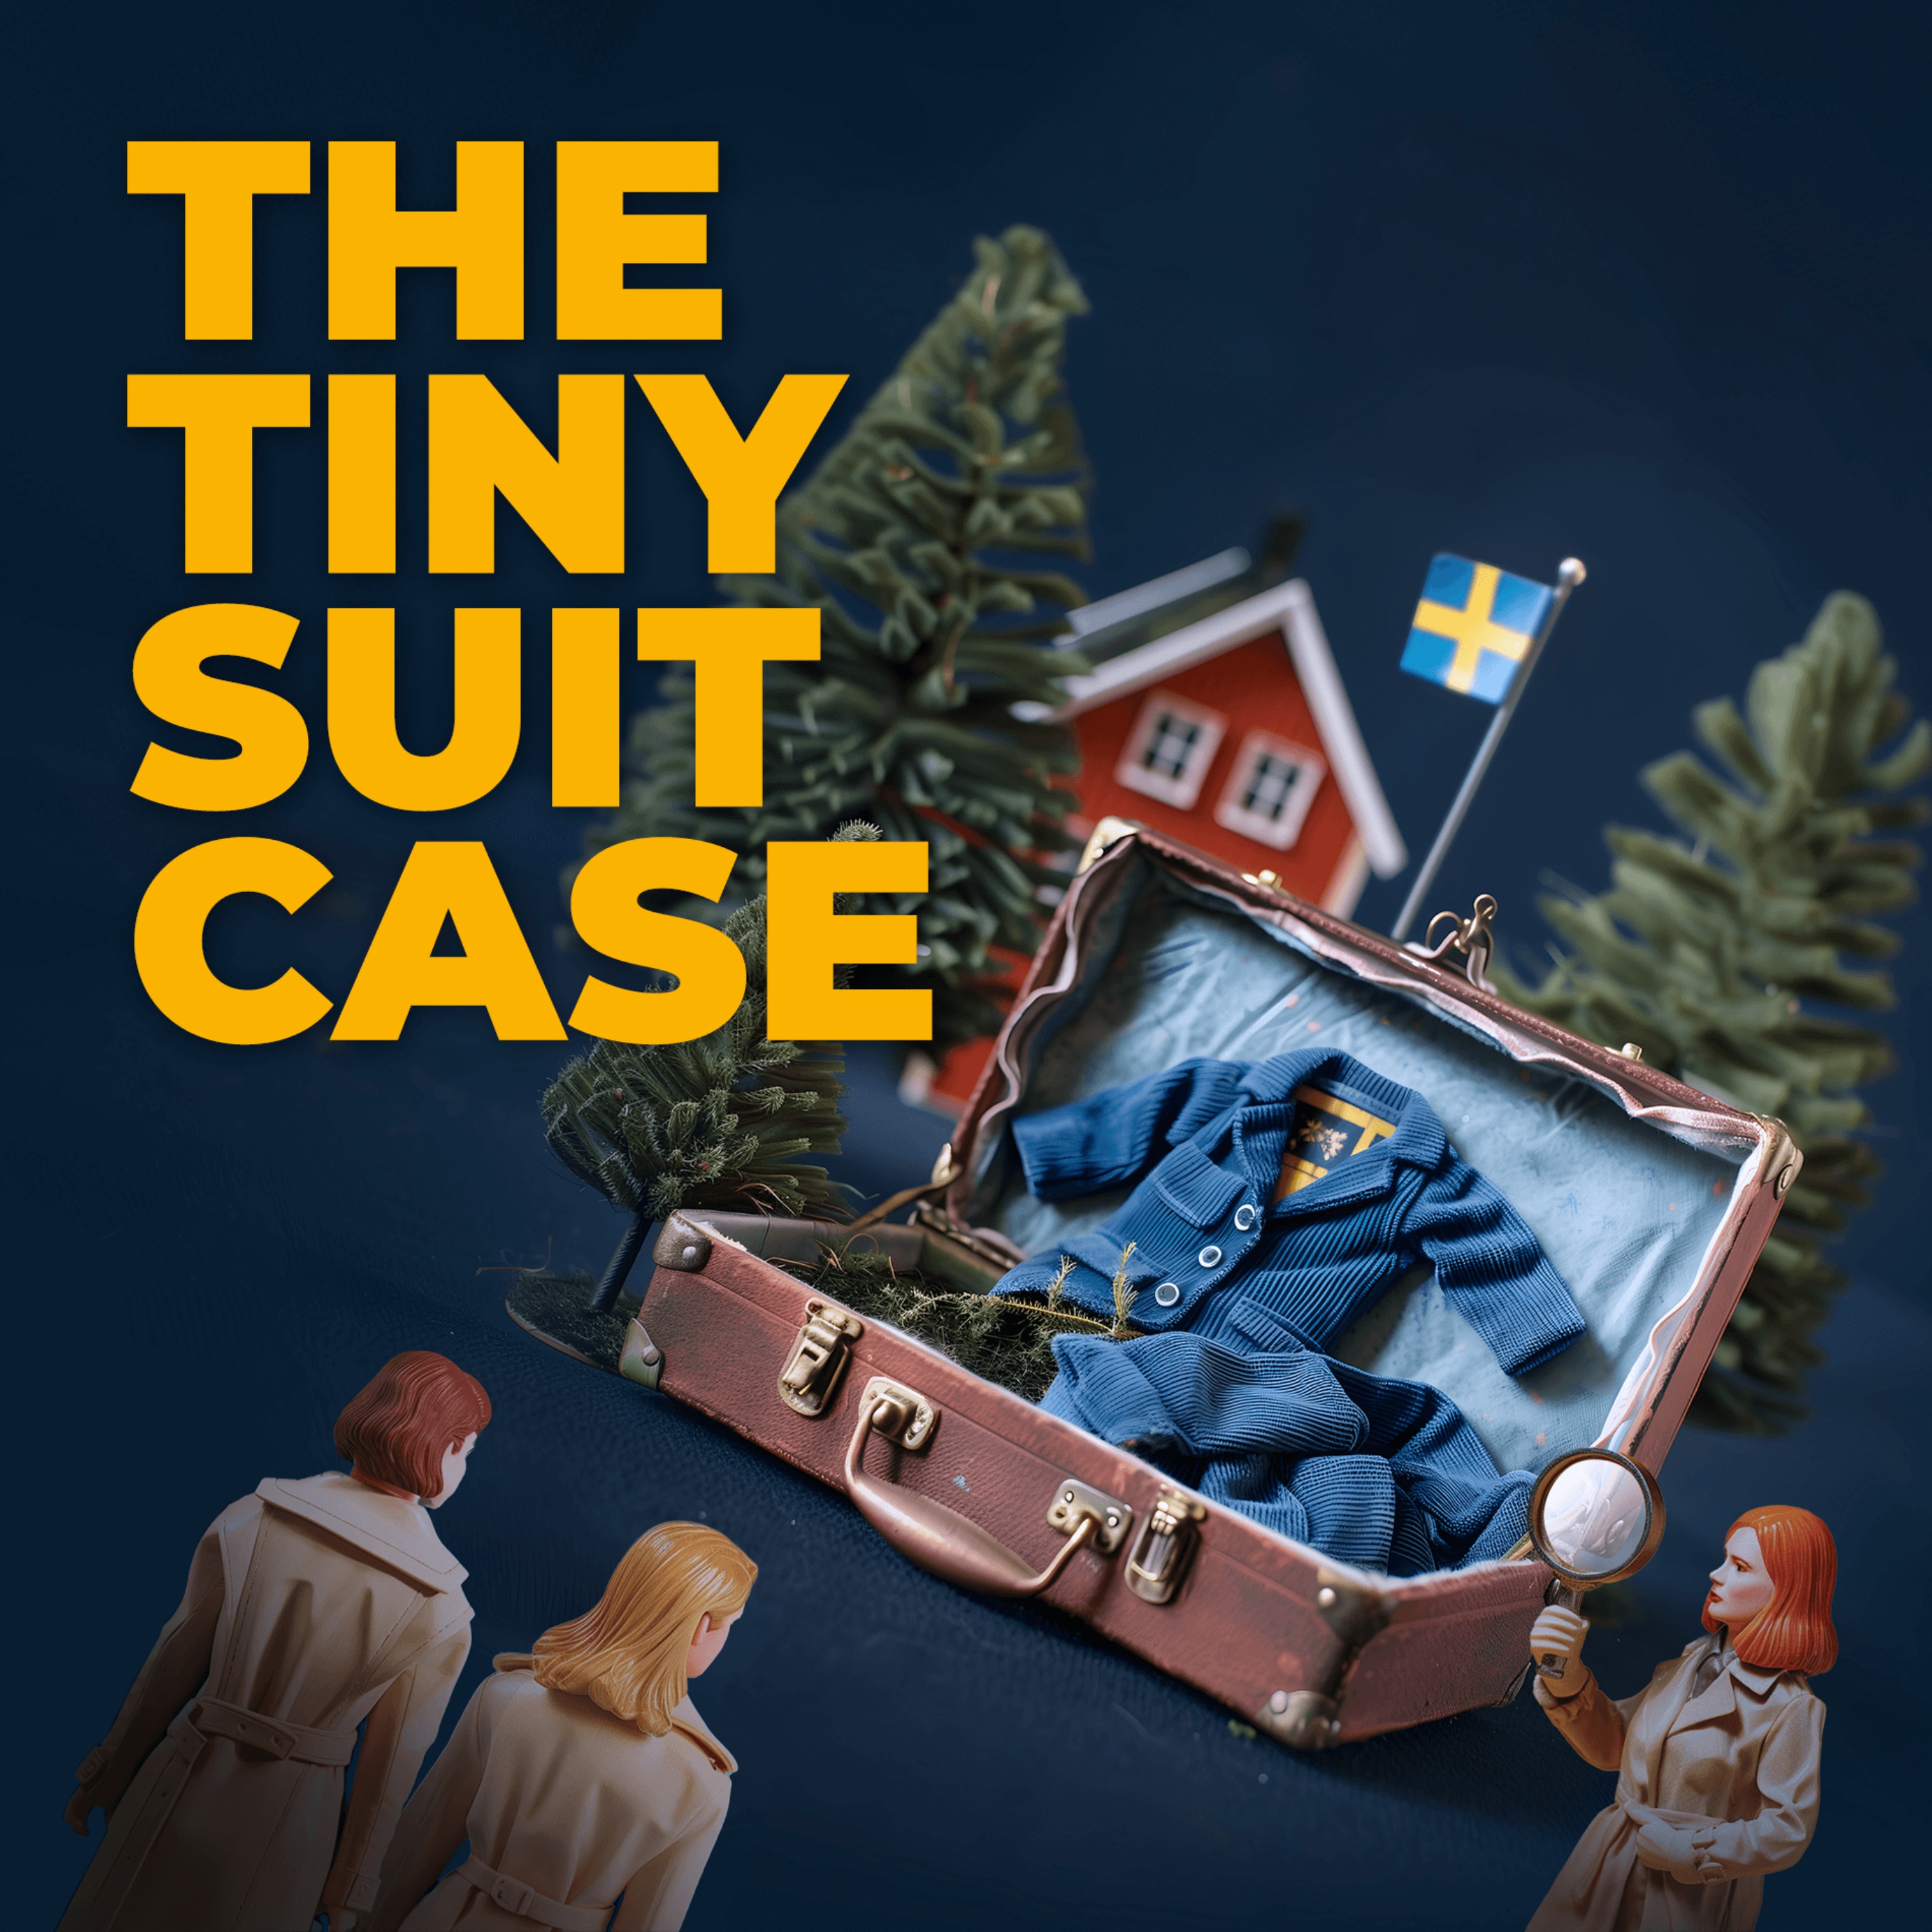 S2 E9 The Case Of The Tiny Suit/Case - ‘Thank you and sorry”